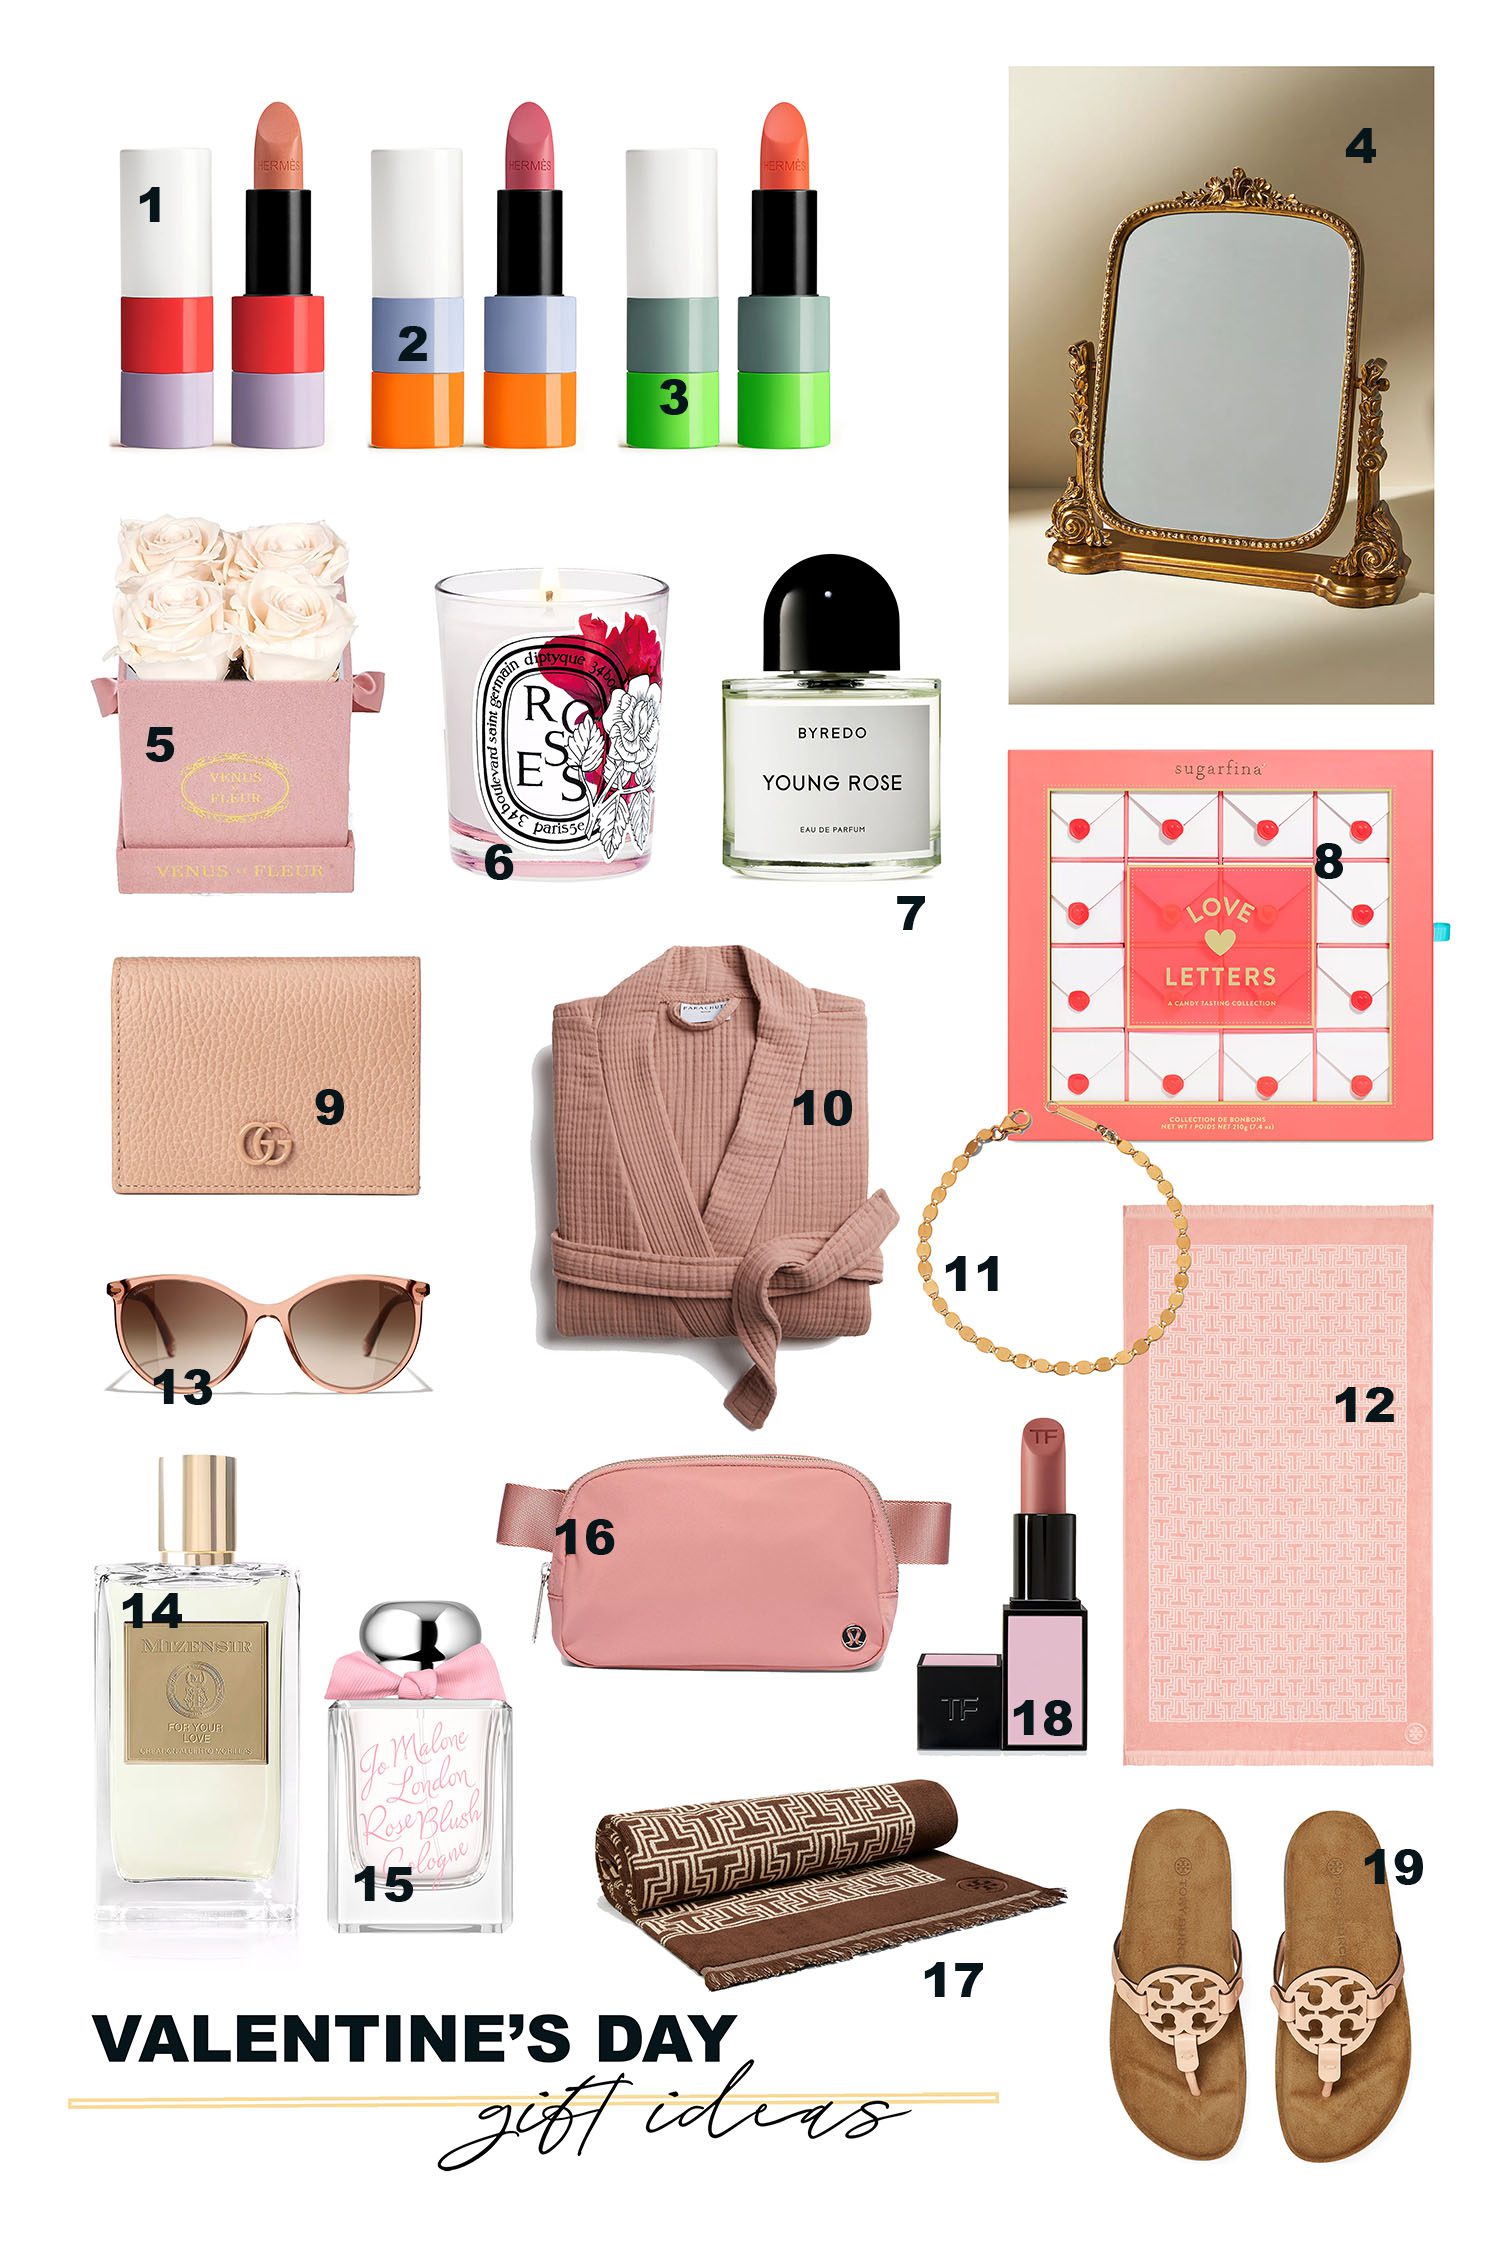 15 Awesome Gifts for Her: The 2021 Valentine's Day Gift Guide - SheBrand